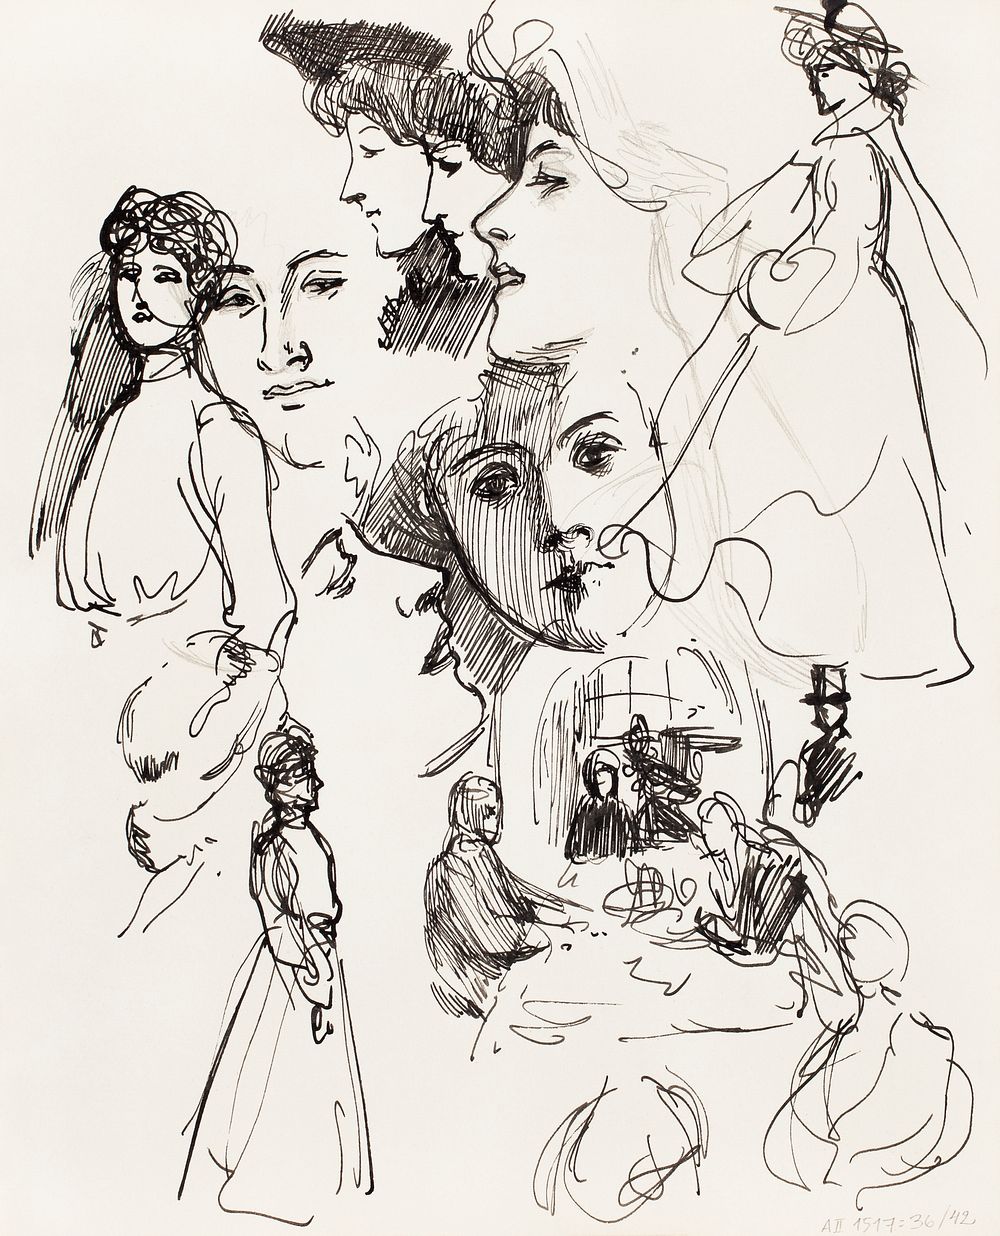 Part of a sketchbook (1854-1905) drawing art by Albert Edelfelt. Original public domain image from The Finnish National…